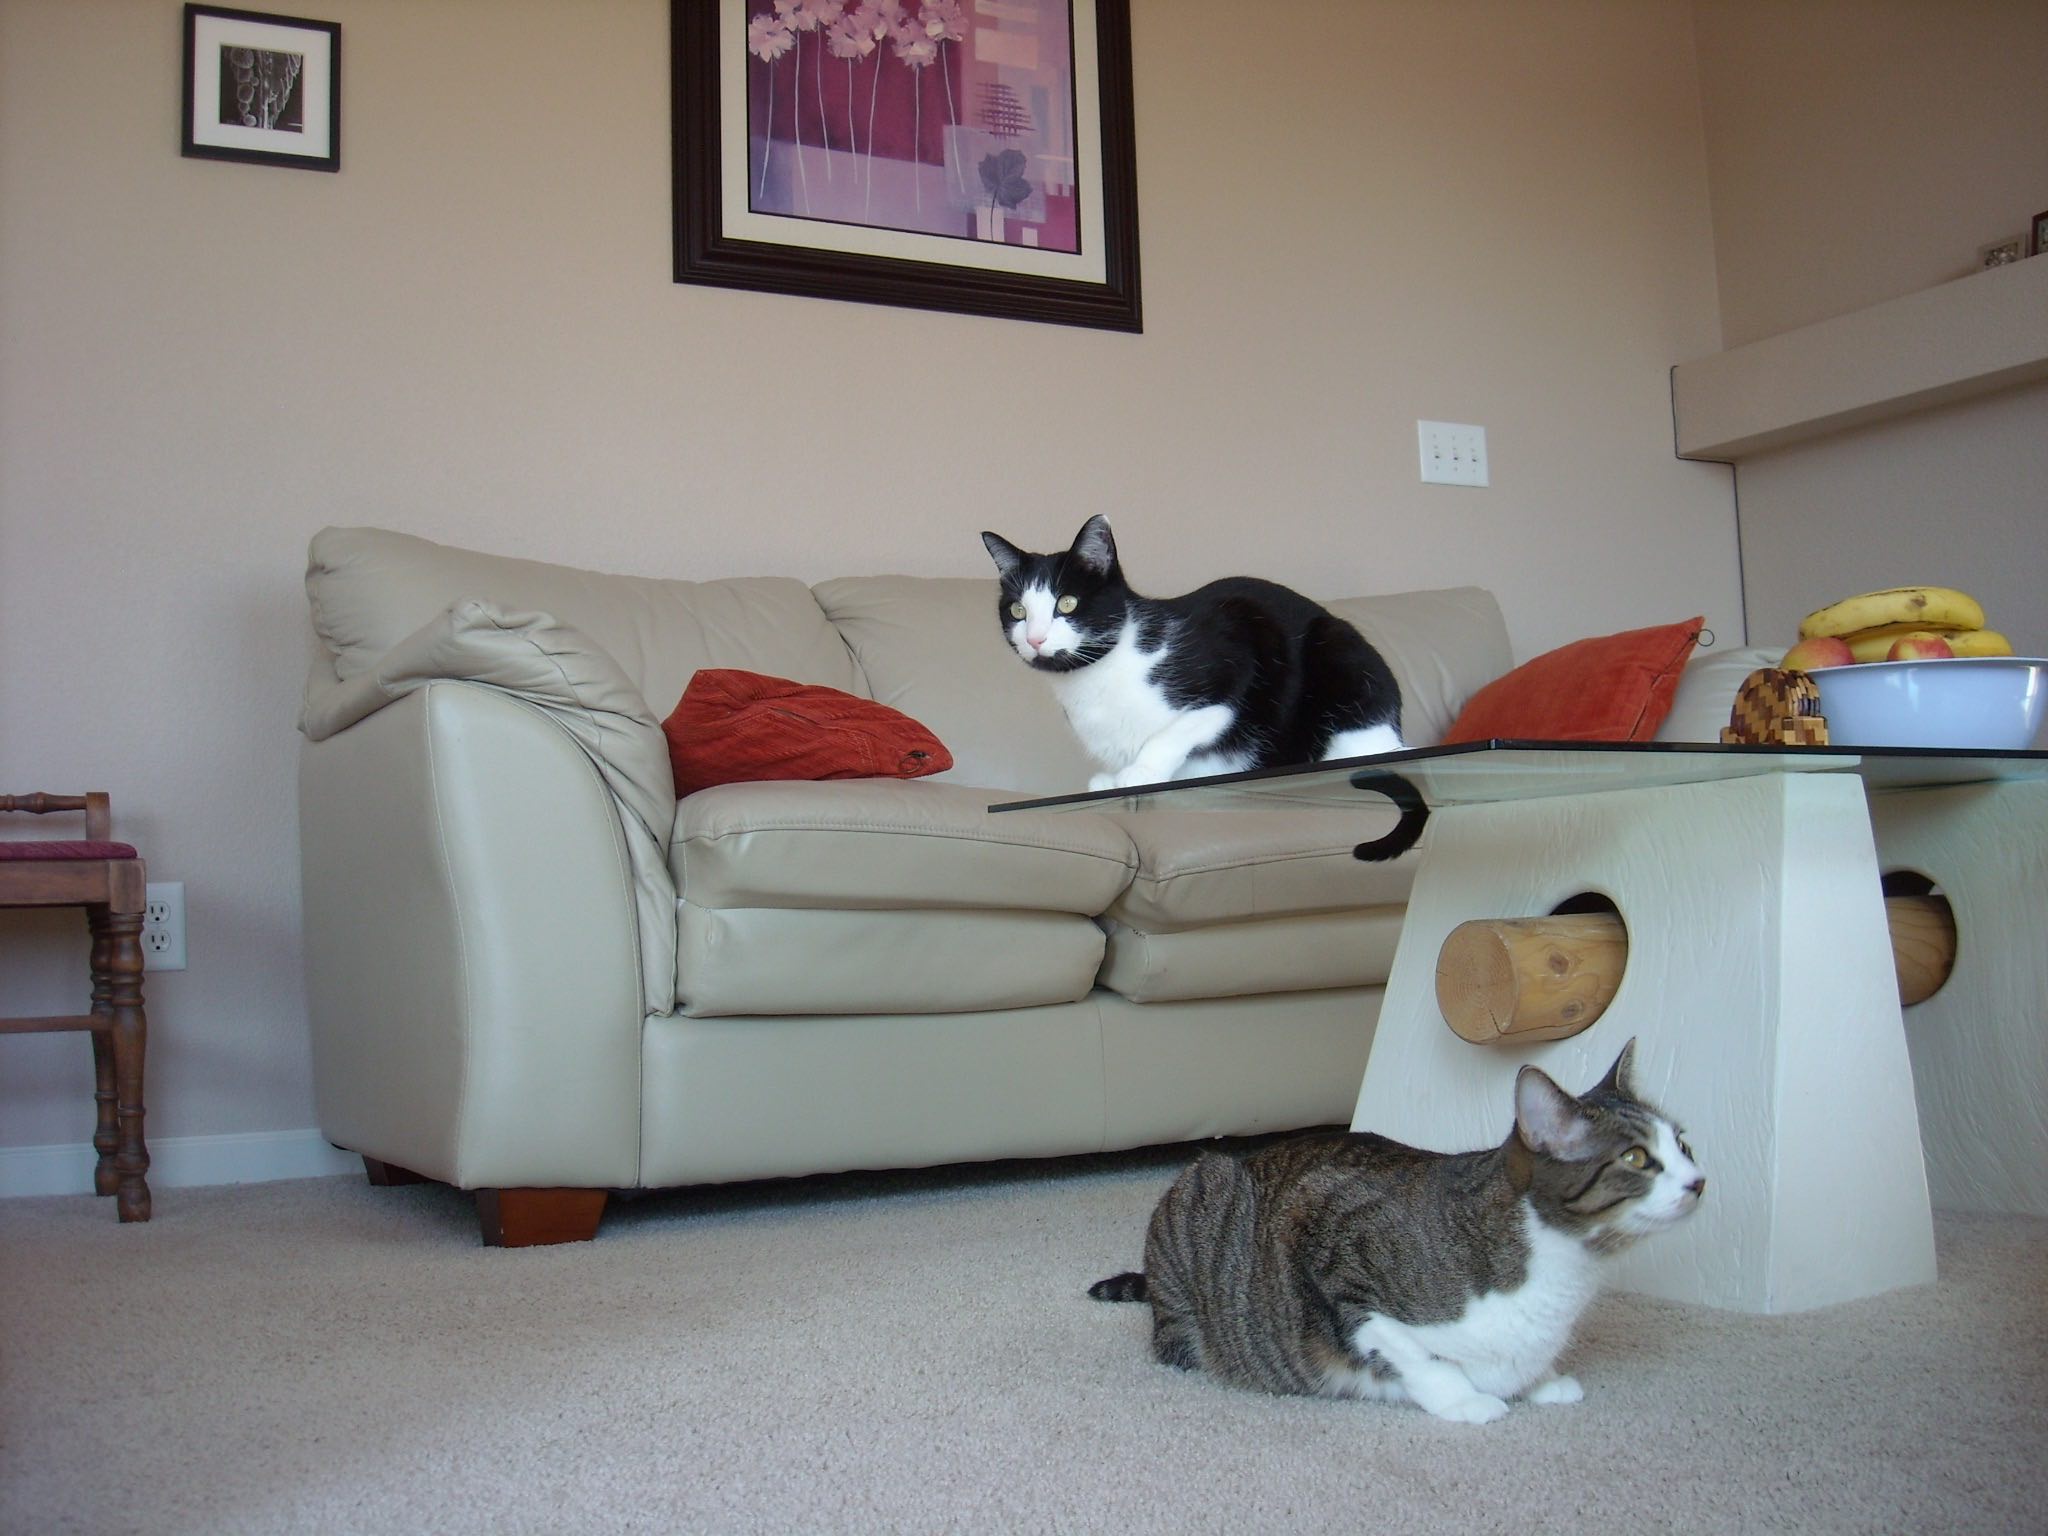 Oreo and Tiger in the family room.